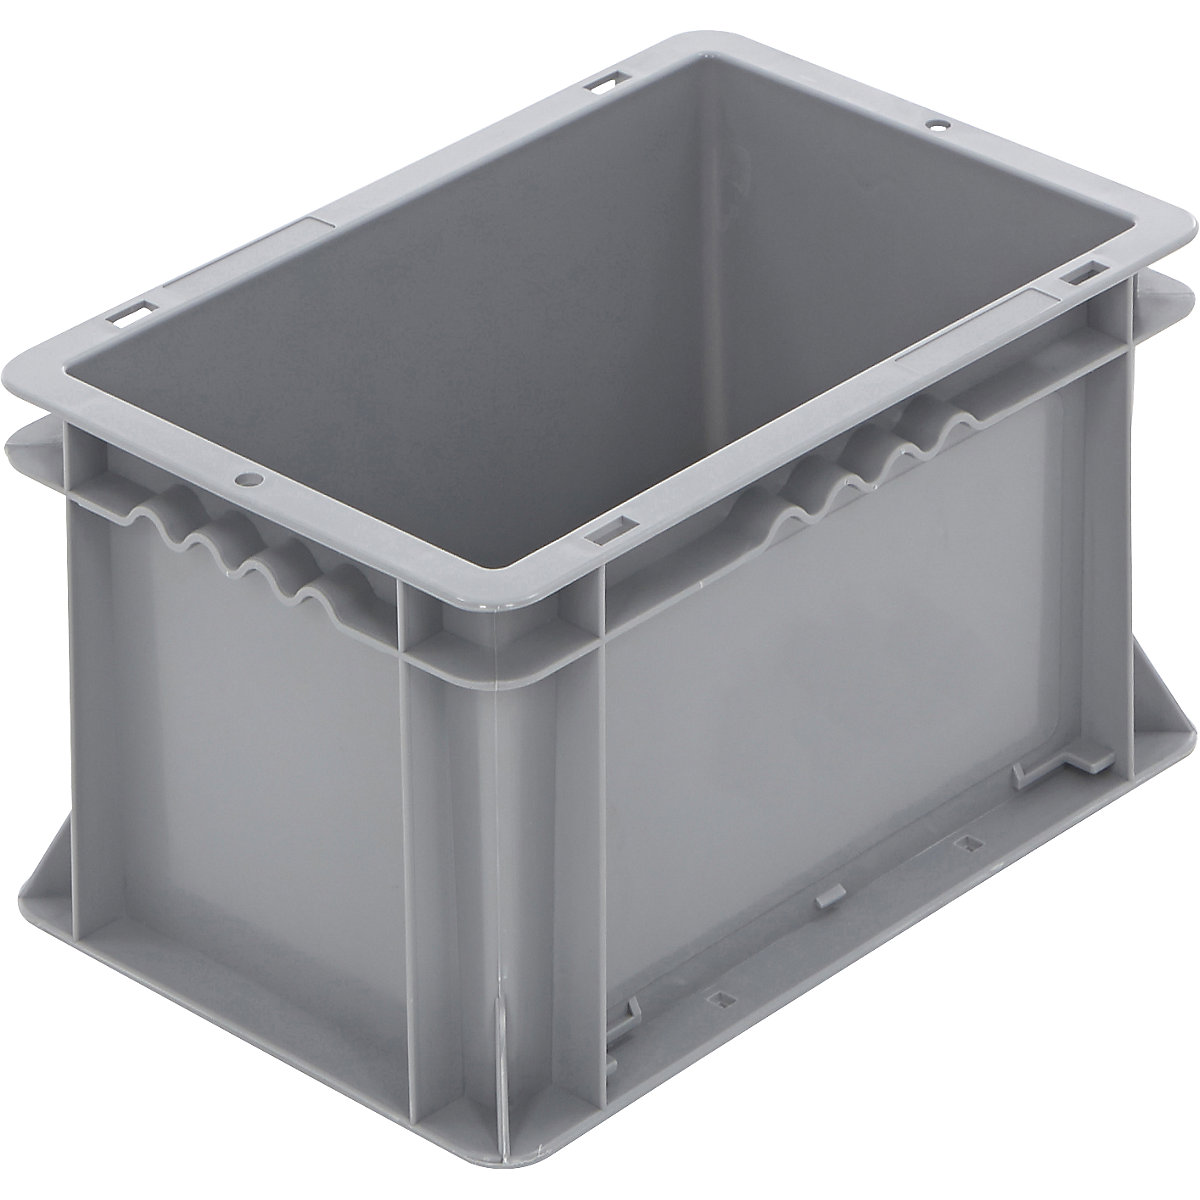 Euro stacking container, capacity 6 litre, grey-8